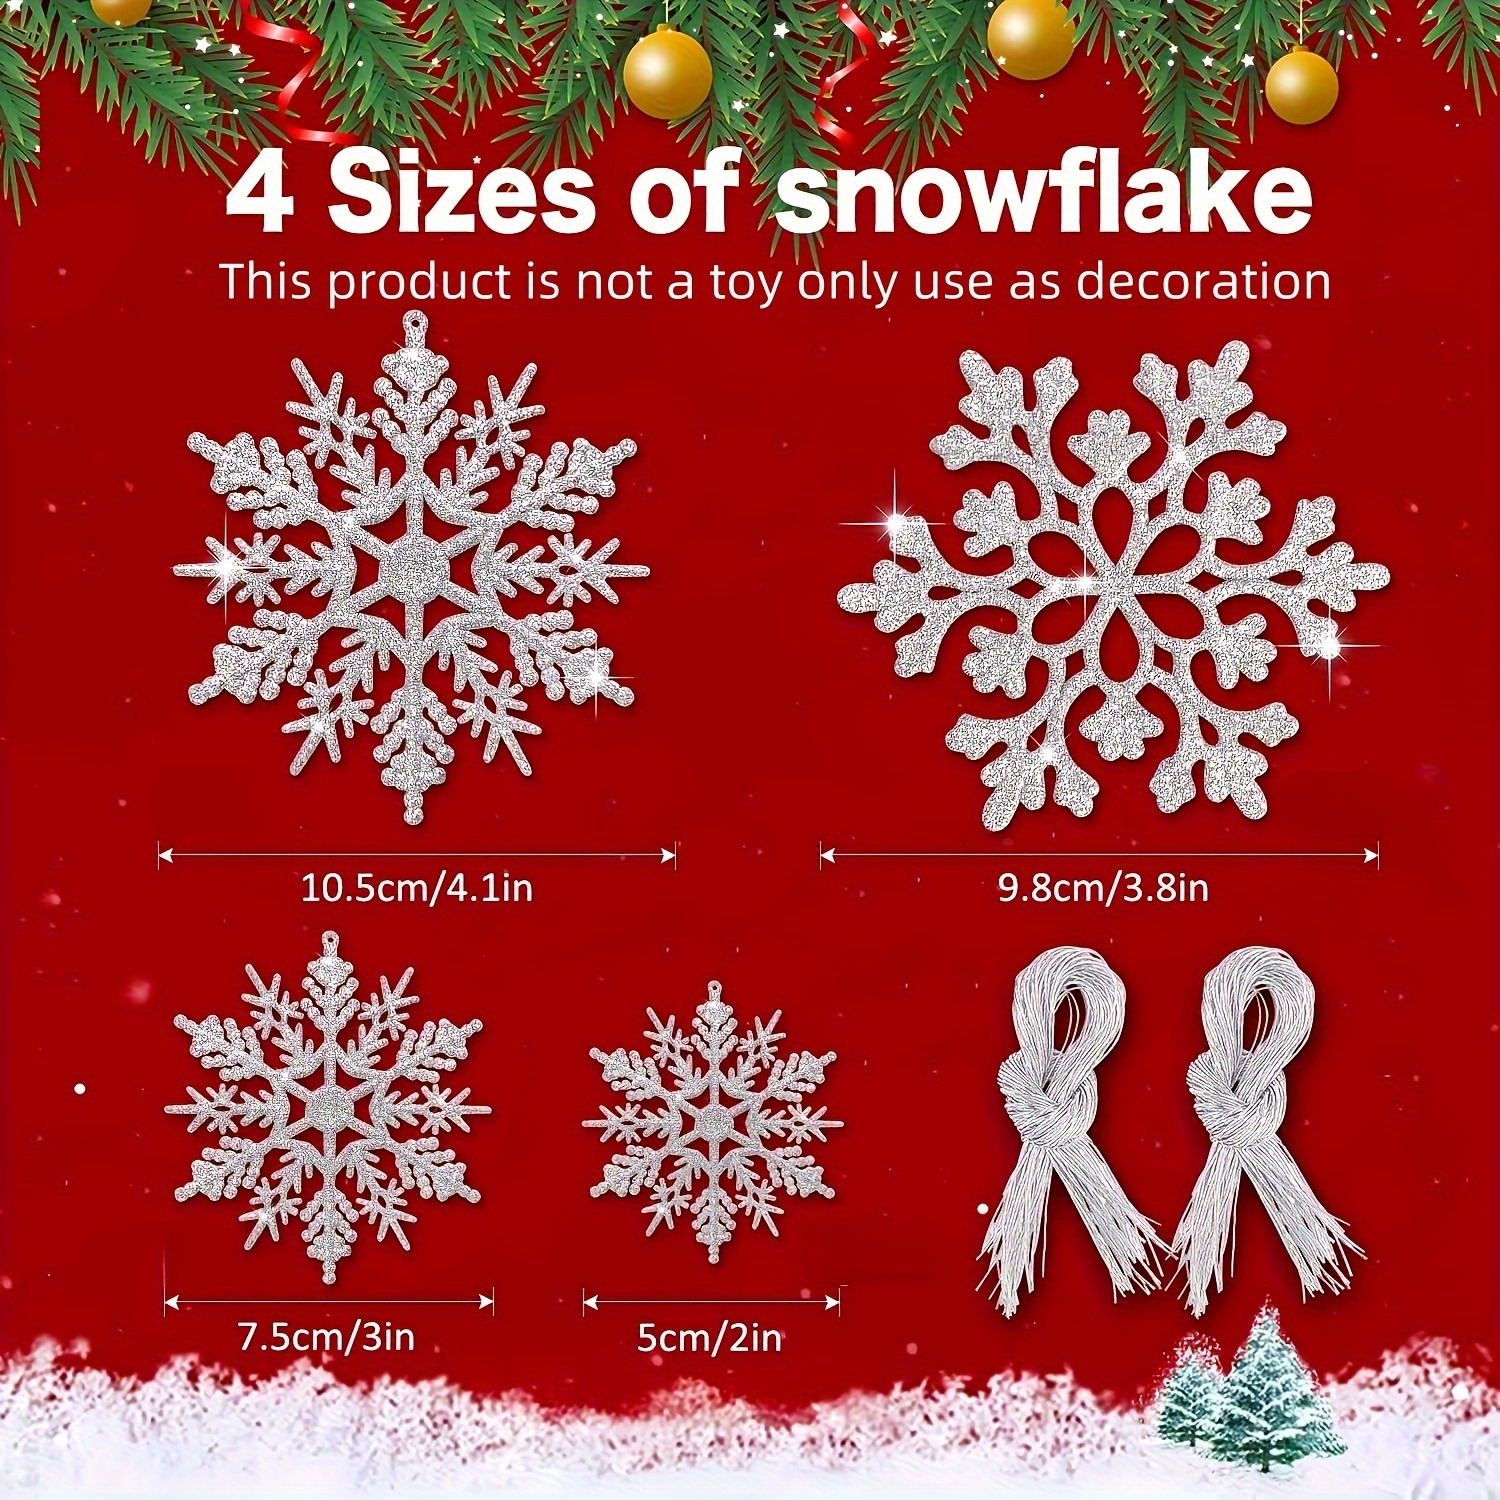 12 Pieces Plastic Snowflake Ornaments Christmas Glitter Snowflakes Hanging Crafts for Christmas Tree Wedding Embellishing Party Decorations, Pink